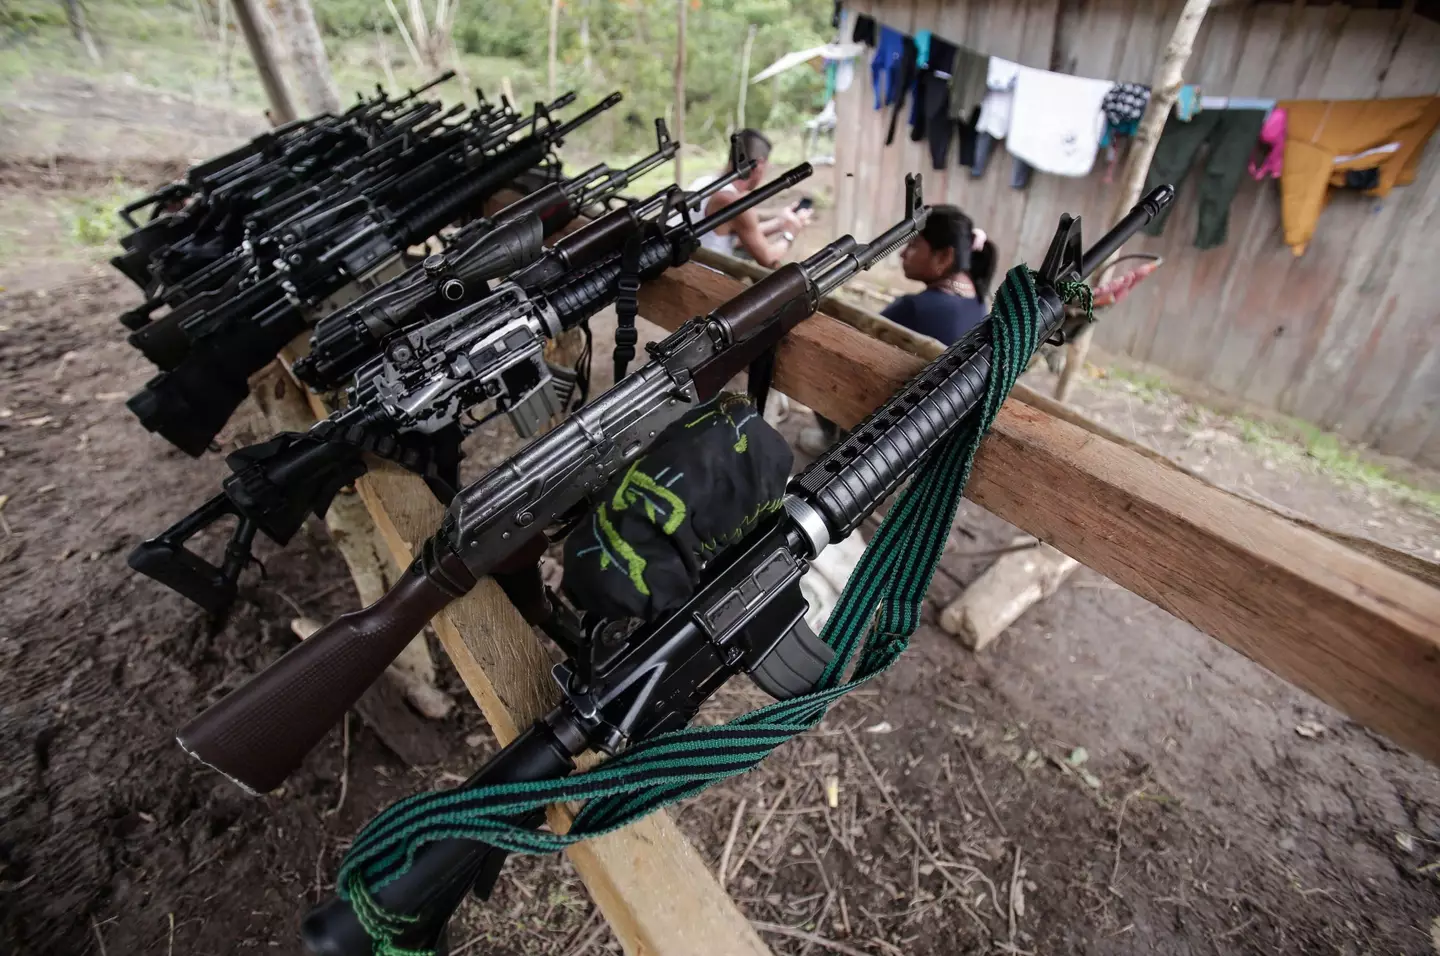 At least 18 people died during a clash between two rebel groups in Colombia over the weekend.